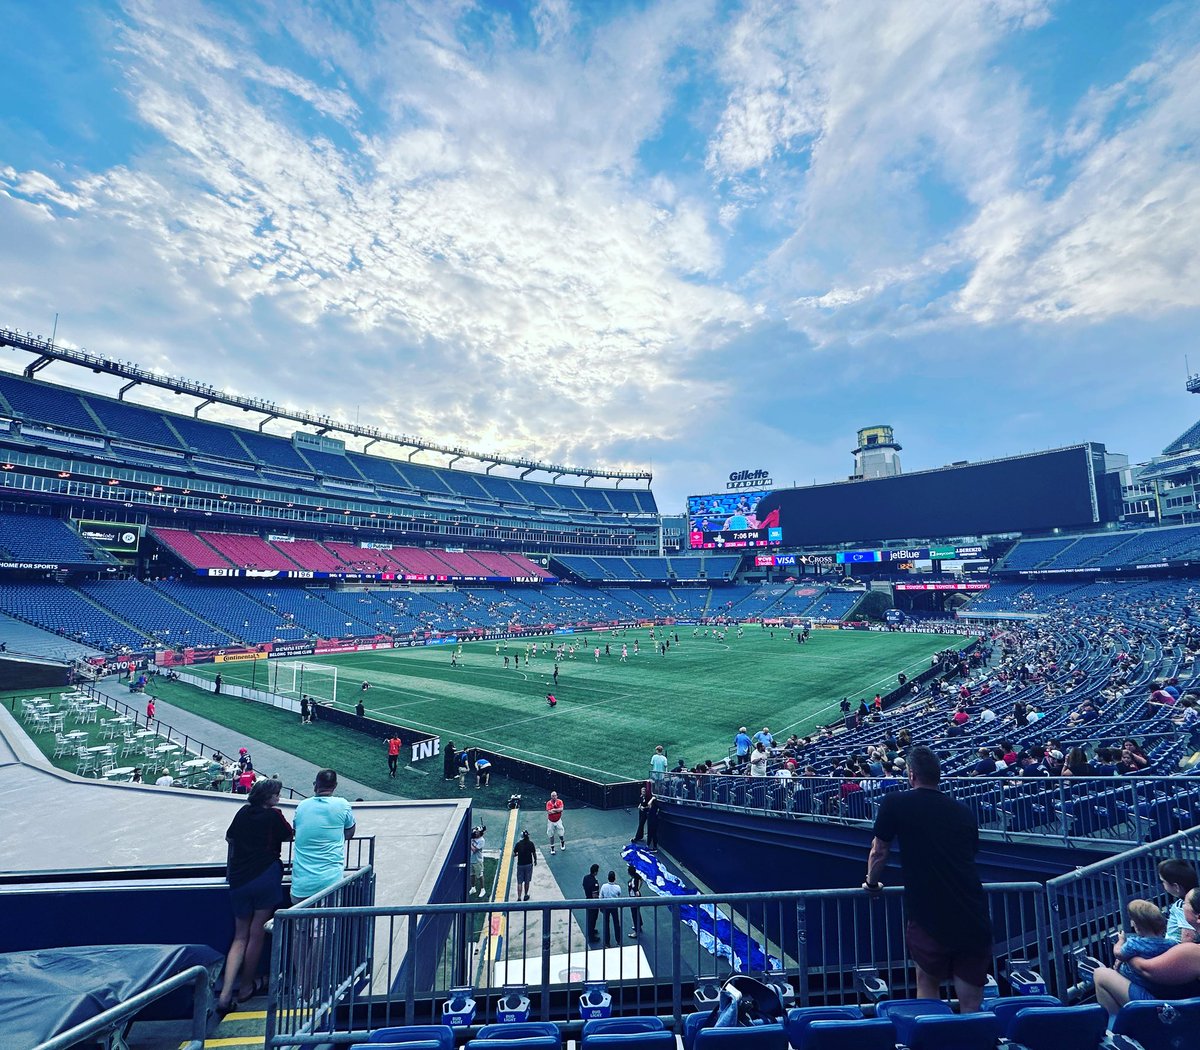 MLS Tour stop #14: Gillette Stadium

Home to the New England Revolution (and the Evil Empire) https://t.co/K1mZOPWn98